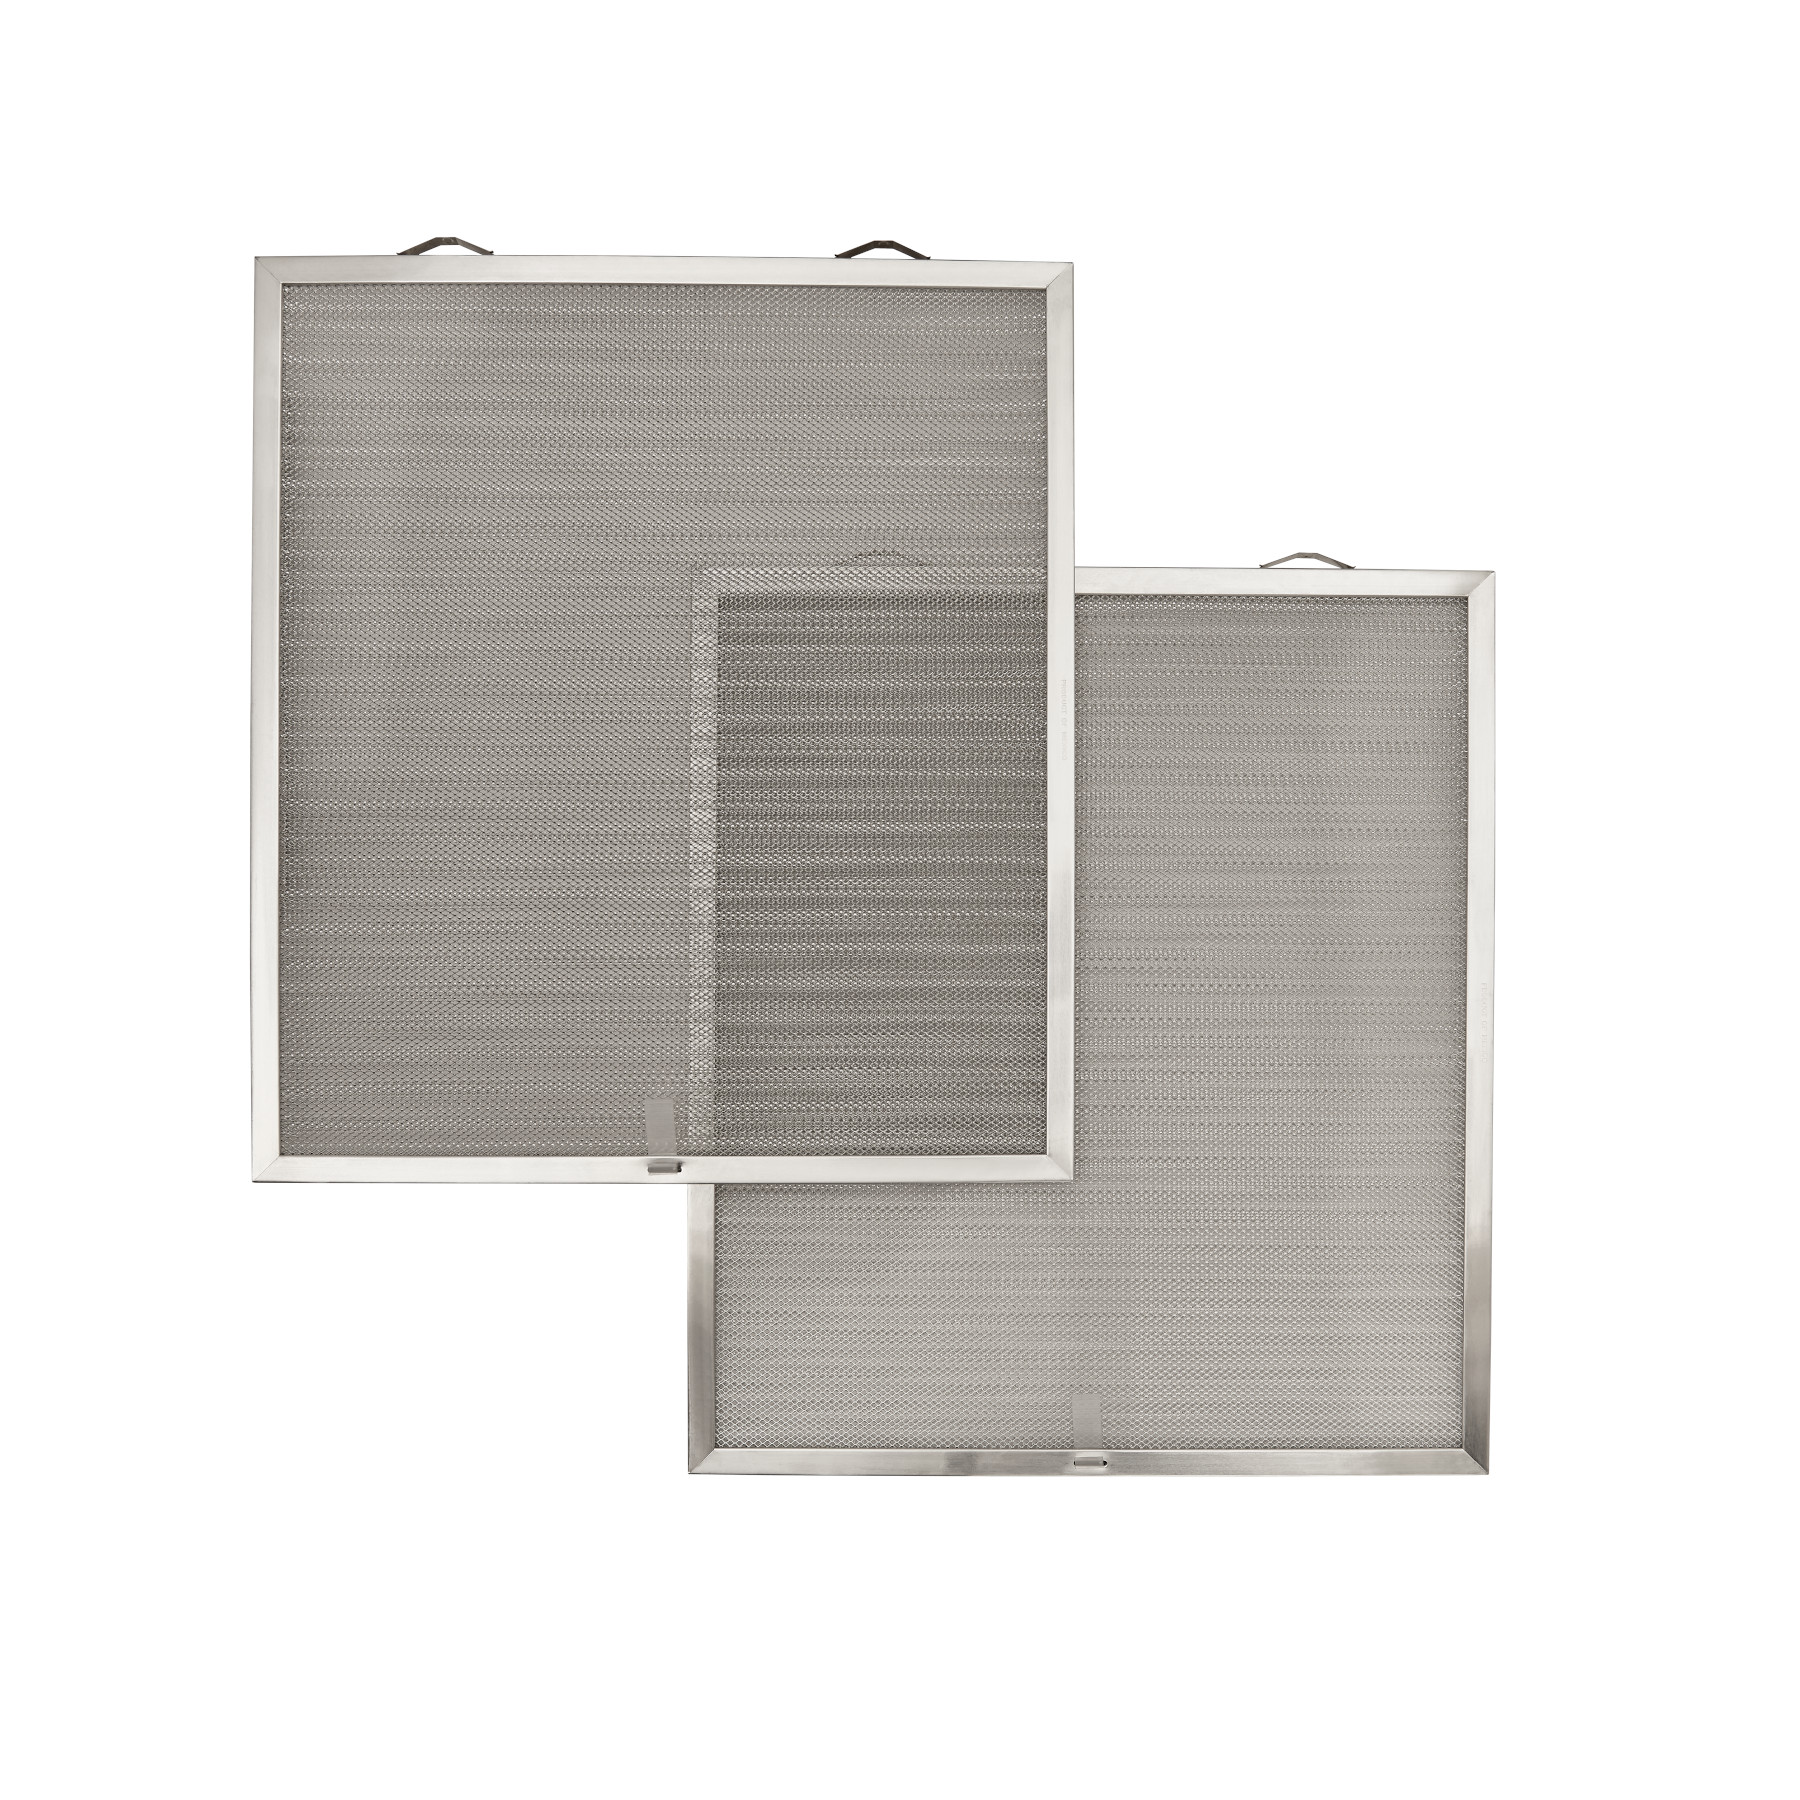 Broan-NuTone® Genuine Replacement Aluminum Filter for 36" wide Range Hoods, 15-3/4" x 16-7/8", Fits Select Models, (2-Pa